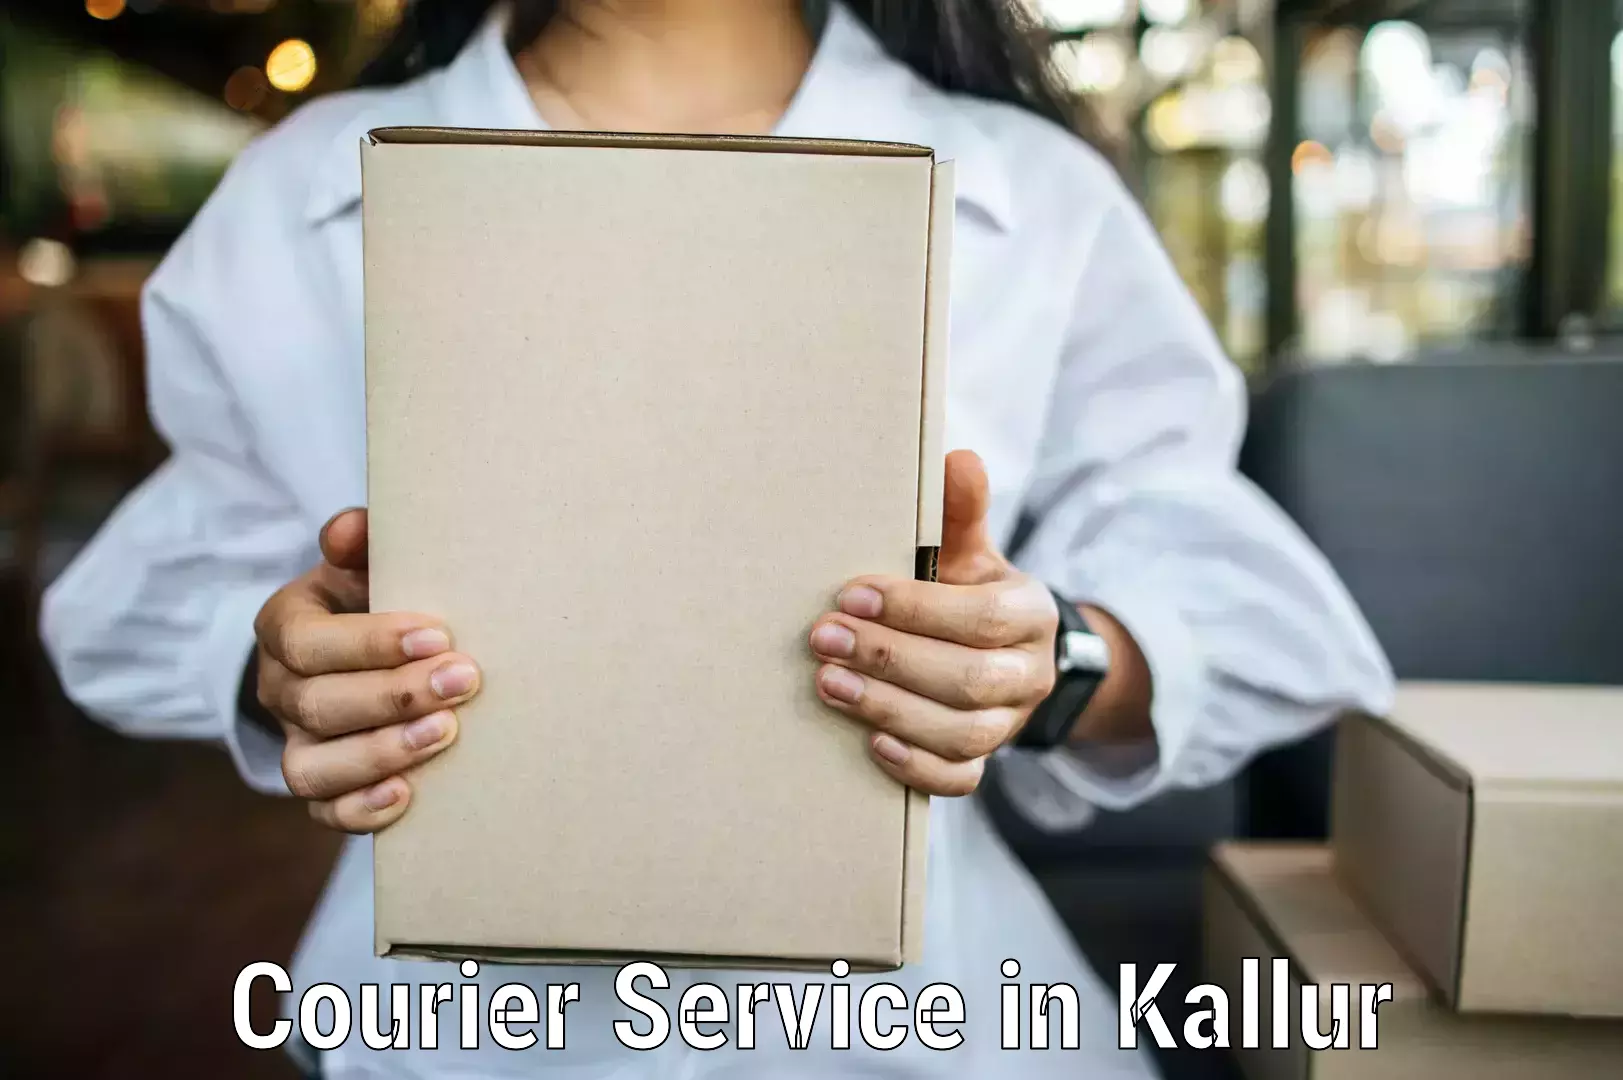 Sustainable delivery practices in Kallur